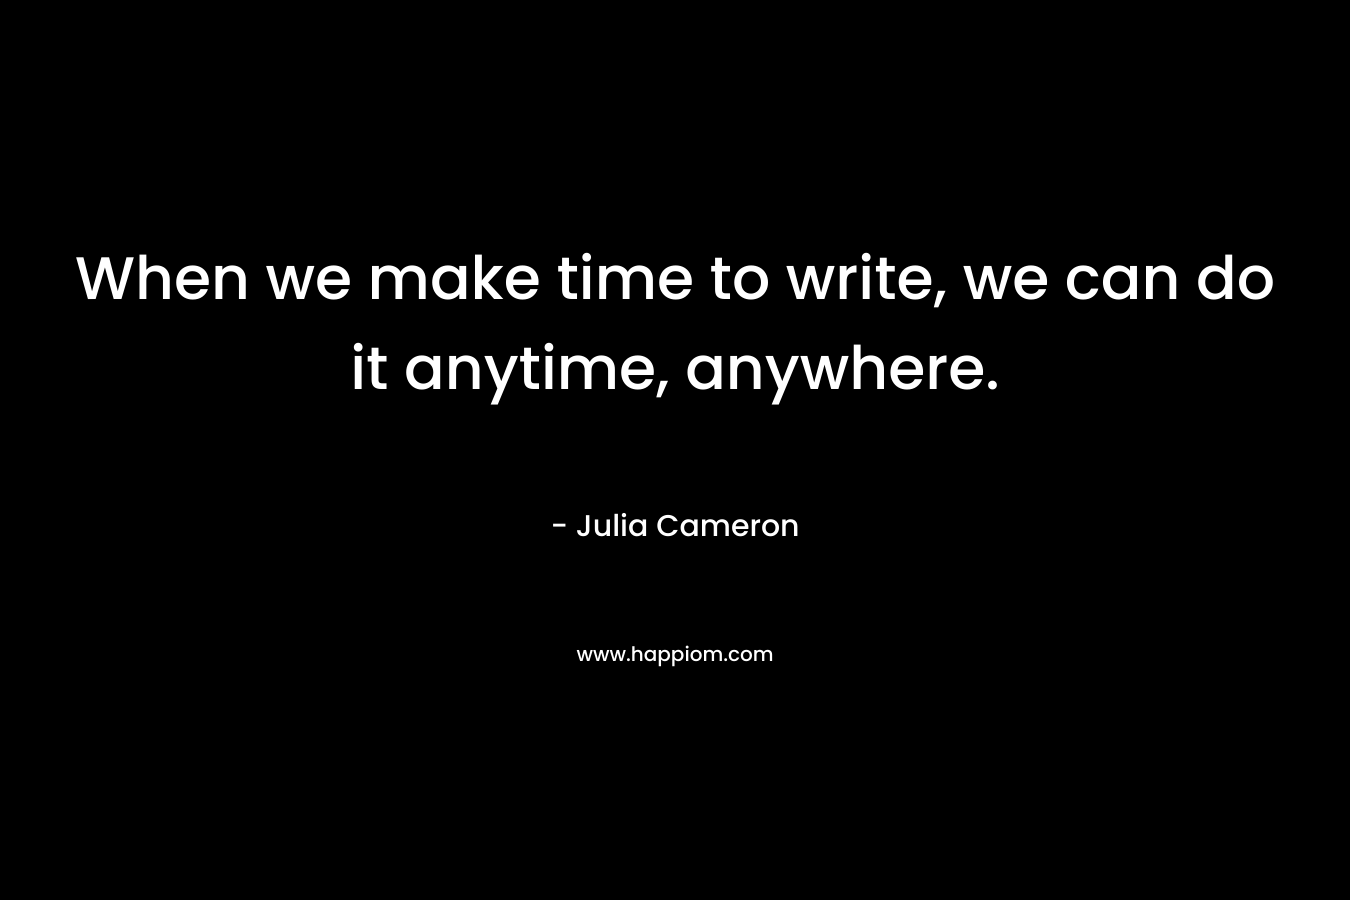 When we make time to write, we can do it anytime, anywhere.